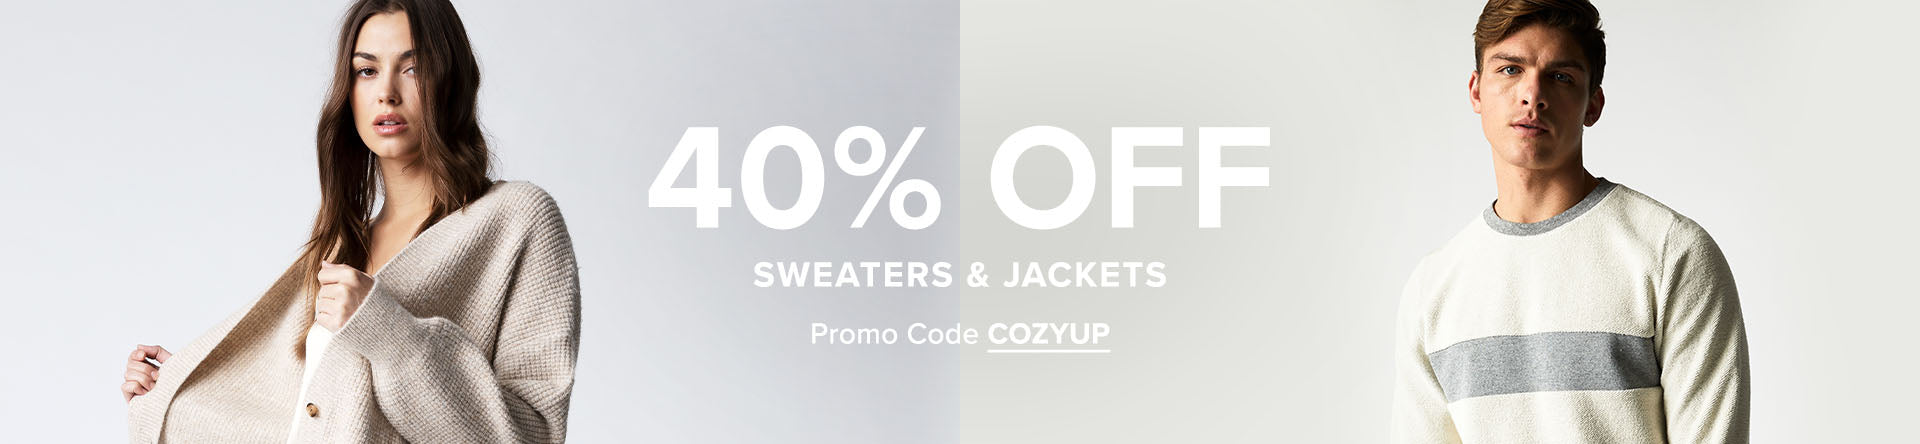 WOMEN / THE STAY-WARM SALE's Collection Banner Image